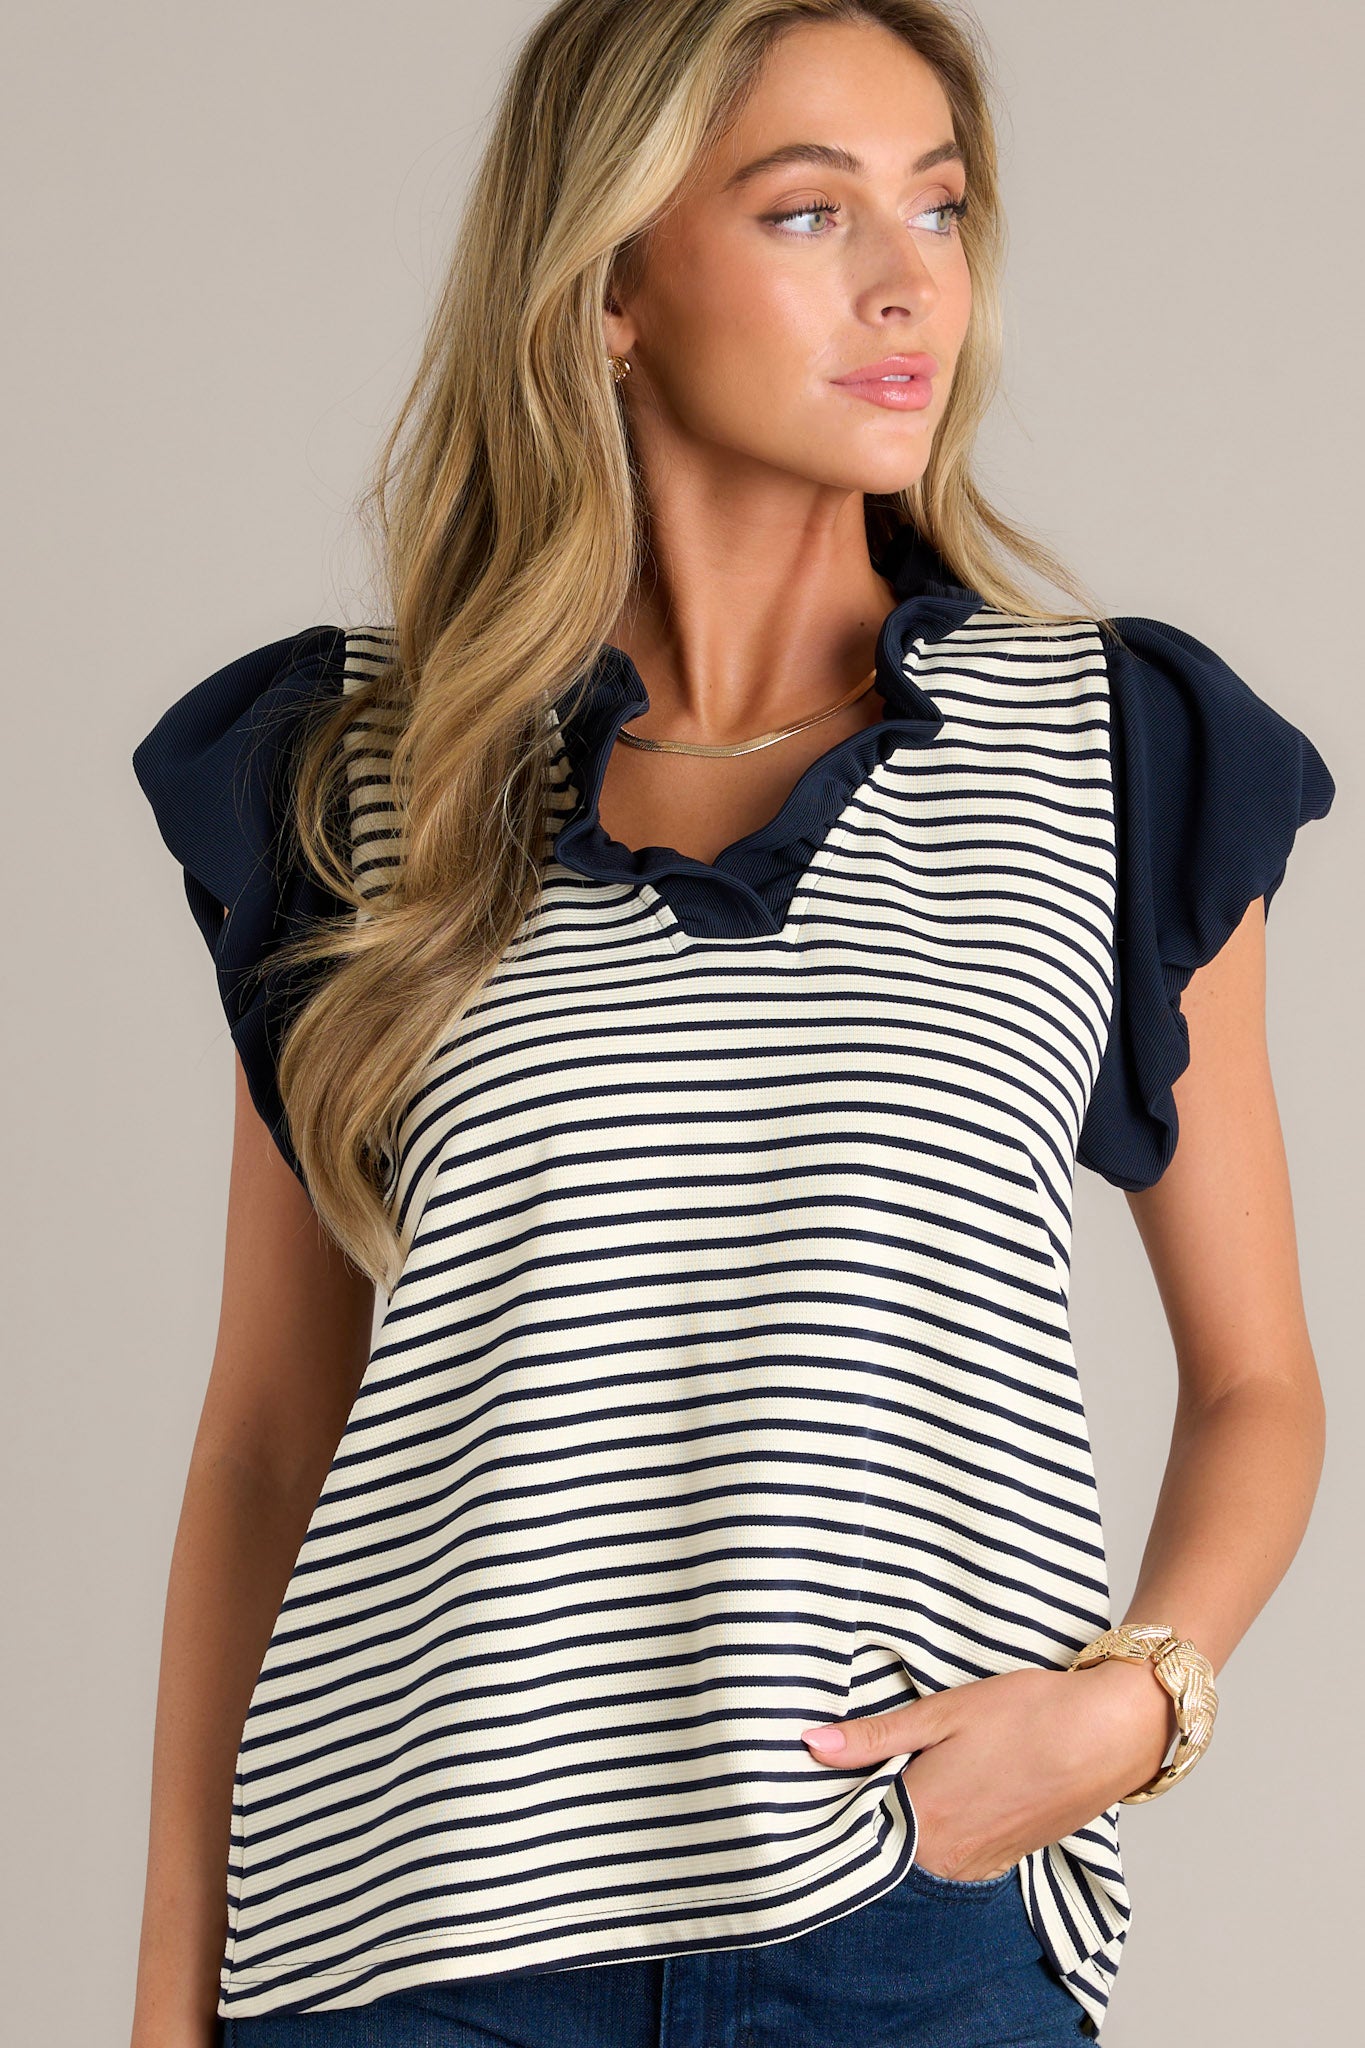 This beige stripe blouse features a navy ruffle v-neckline, navy and beige horizontal stripes, and slightly cuffed short sleeves.